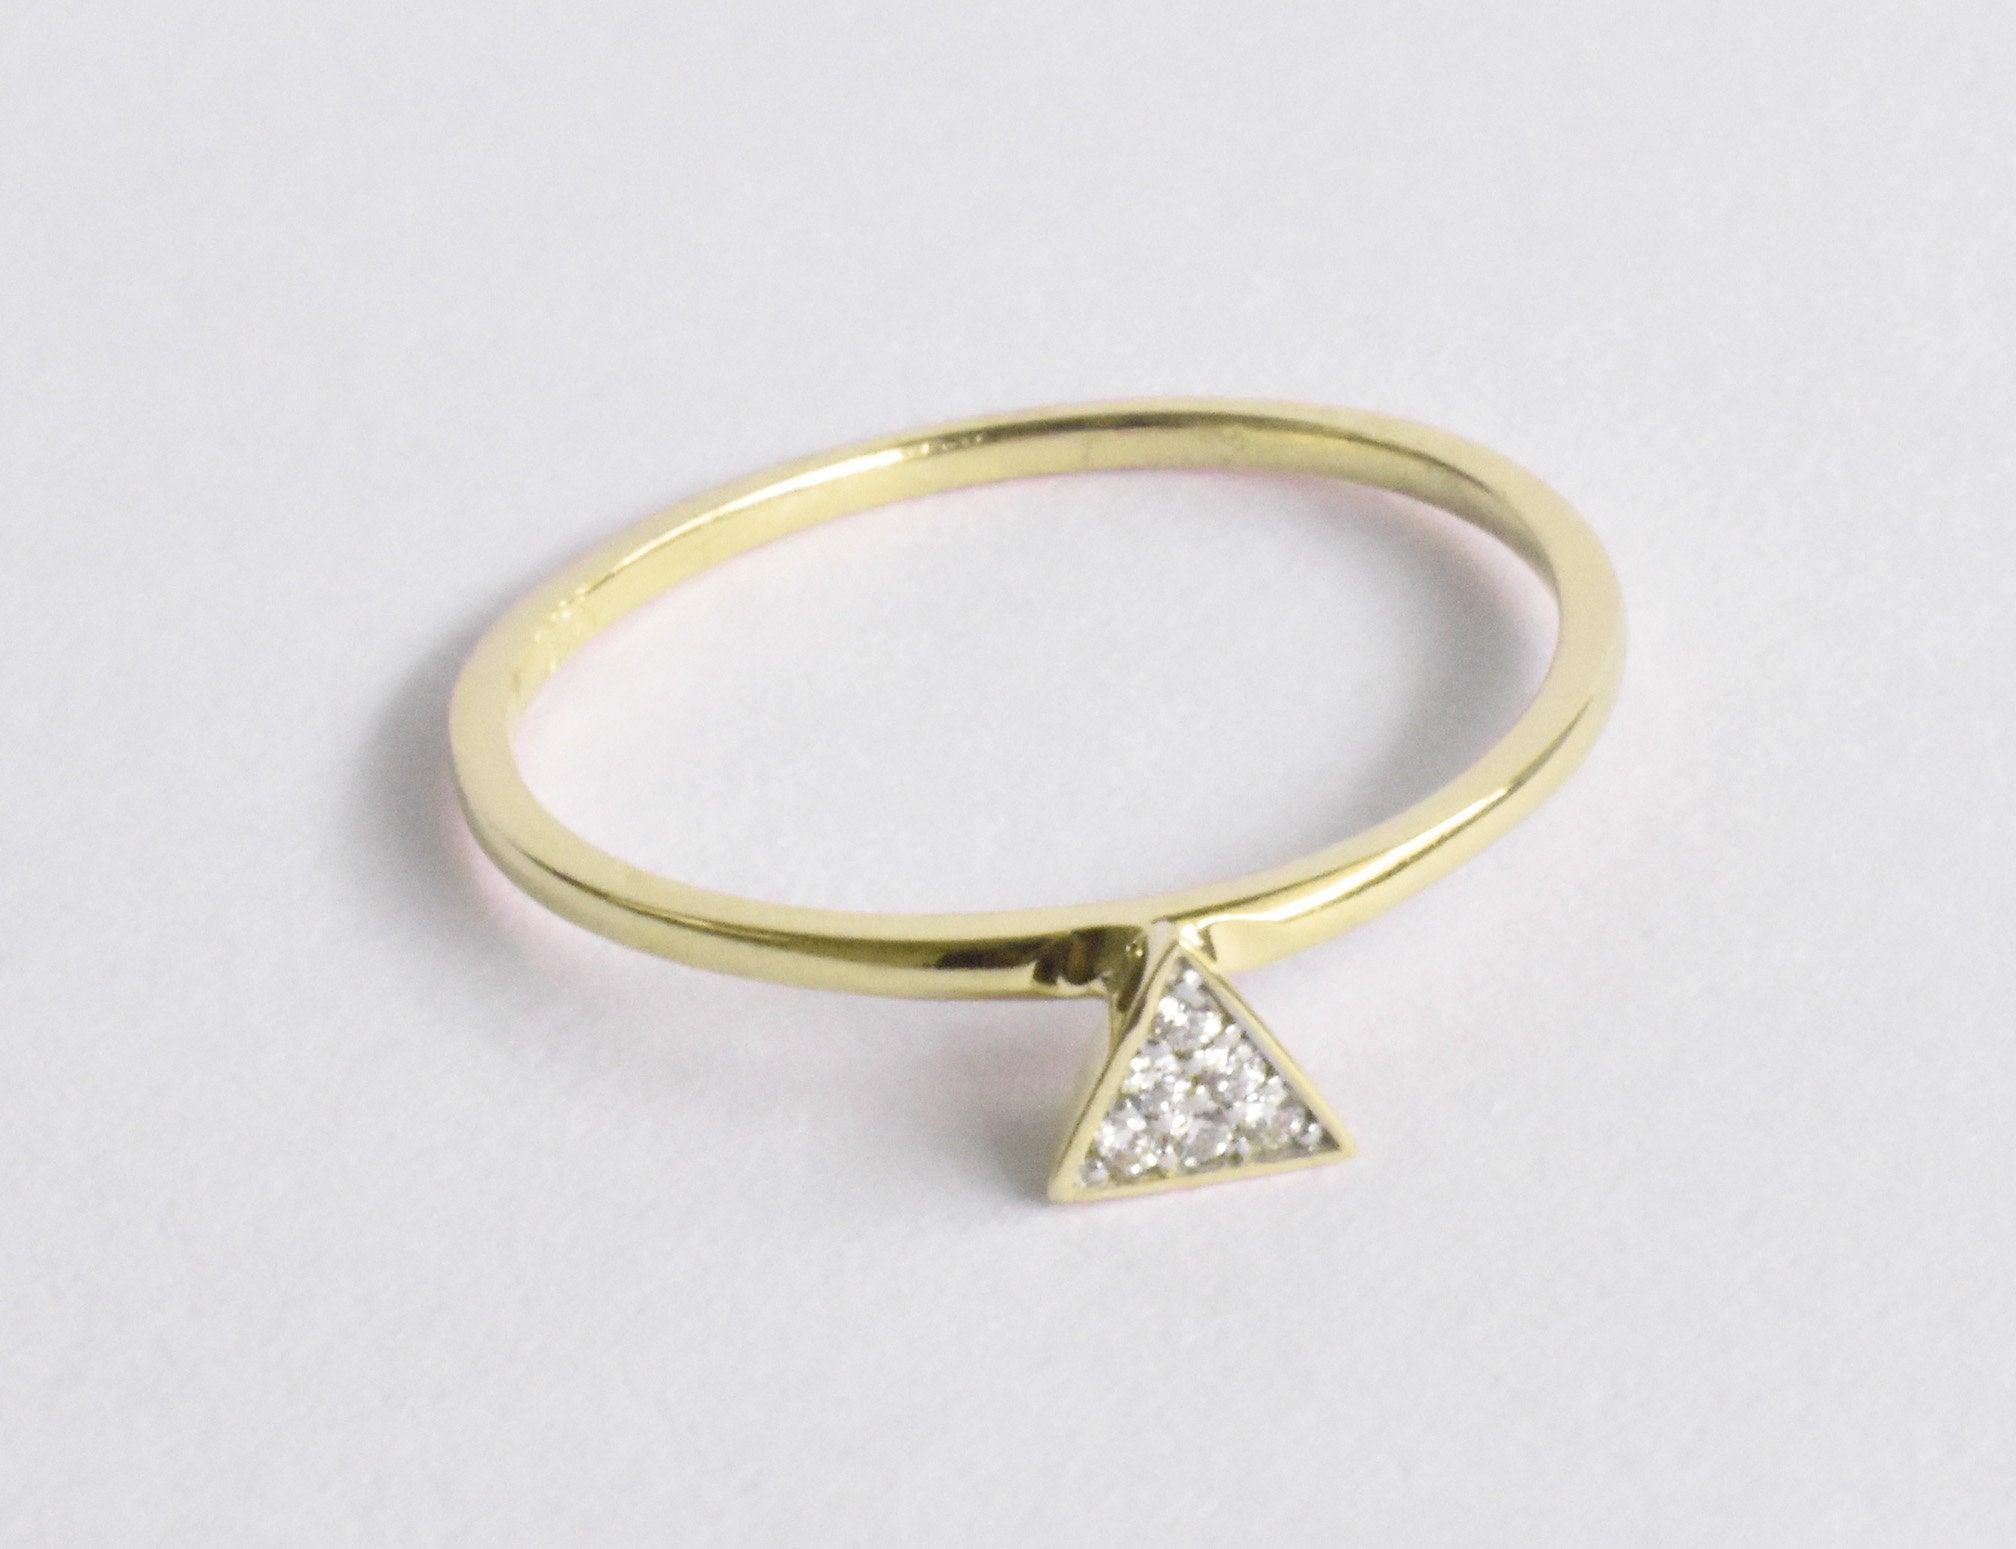 For Sale:  14k Gold Triangle Stacking Ring with White Pave Diamonds Minimalist Ring 3